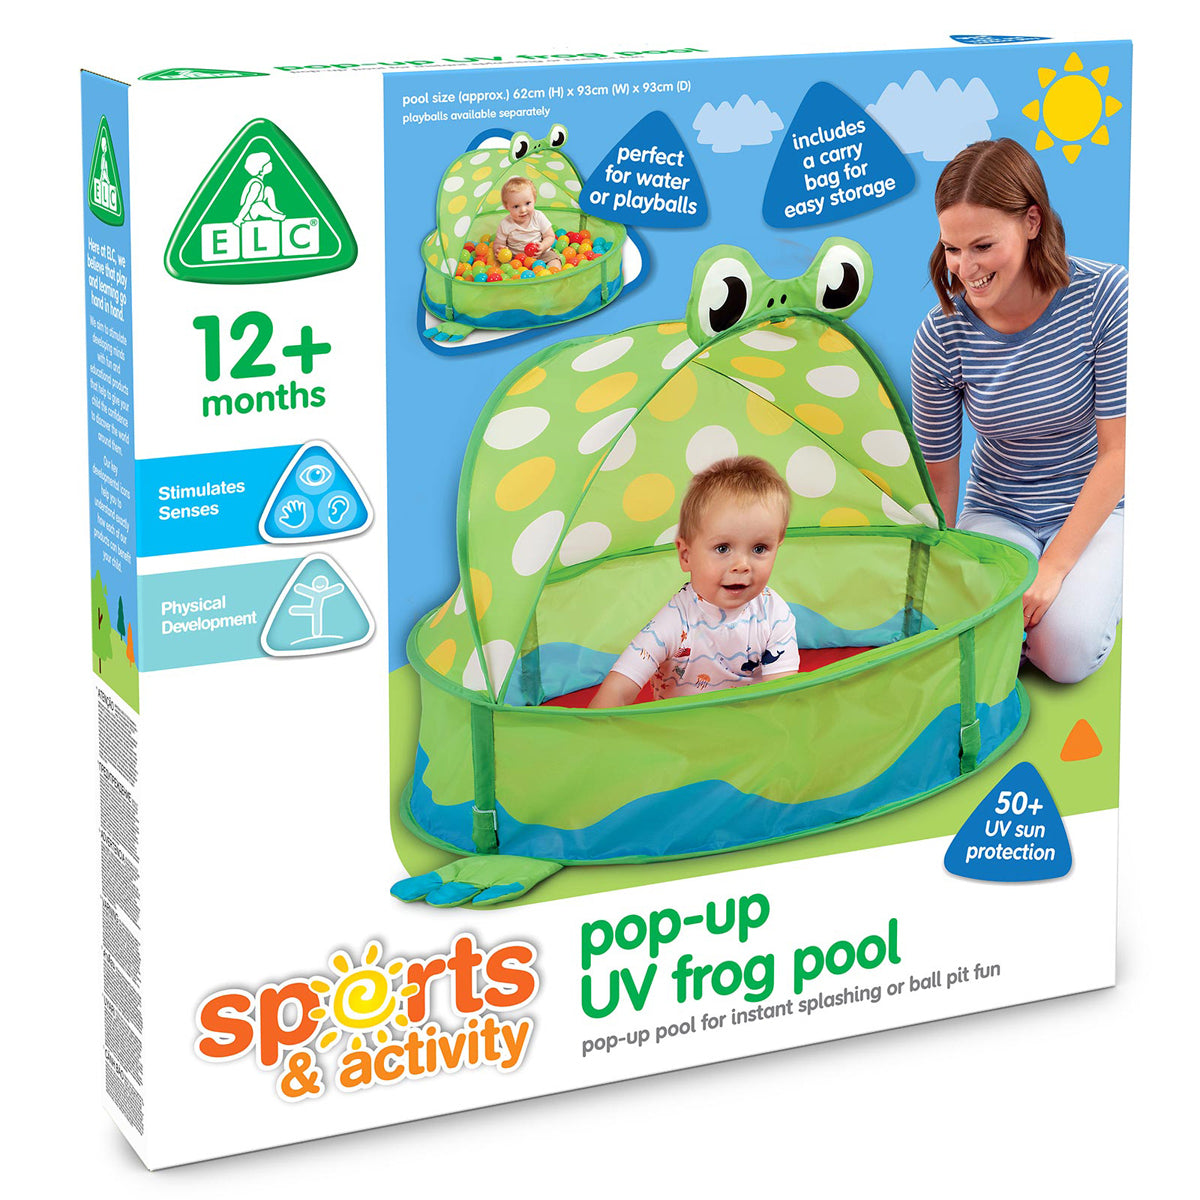 Early Learning Centre Pop-Up UV Frog Pool